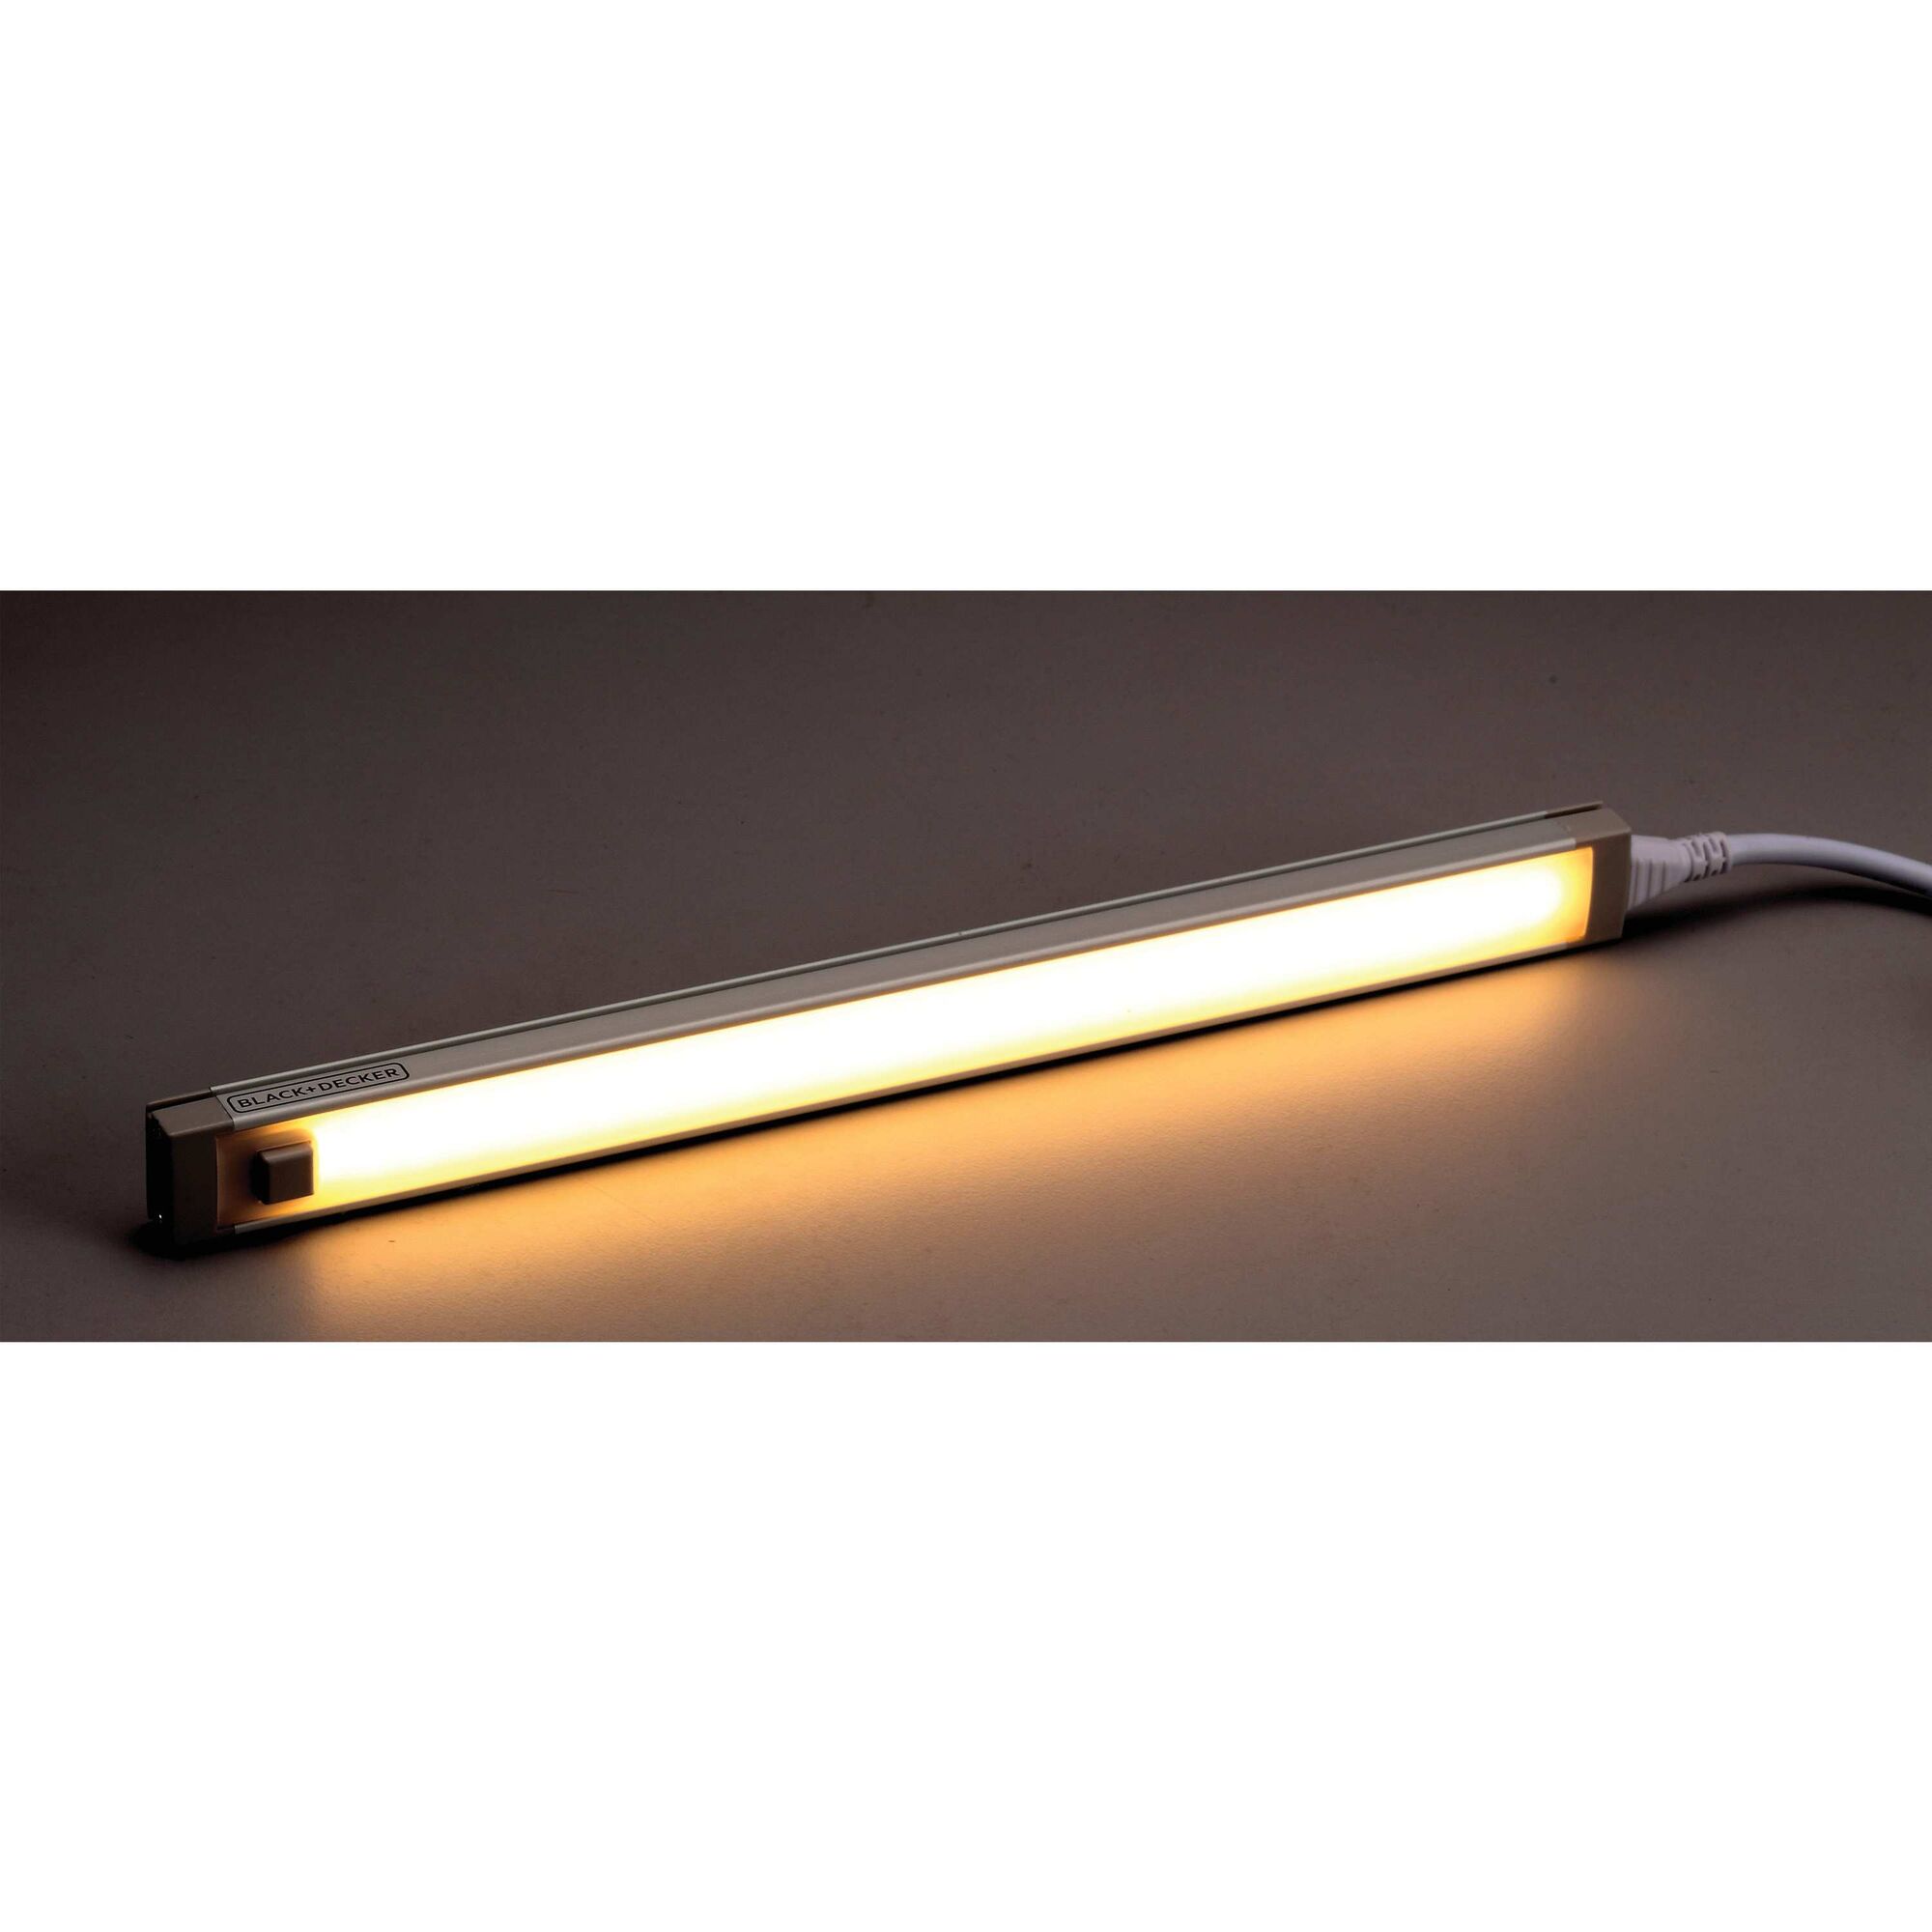 Inviting warm white light temperature feature of 1 BAR Light Emitting Diode UNDER CABINET LIGHTING ACCESSORY LIGHT.